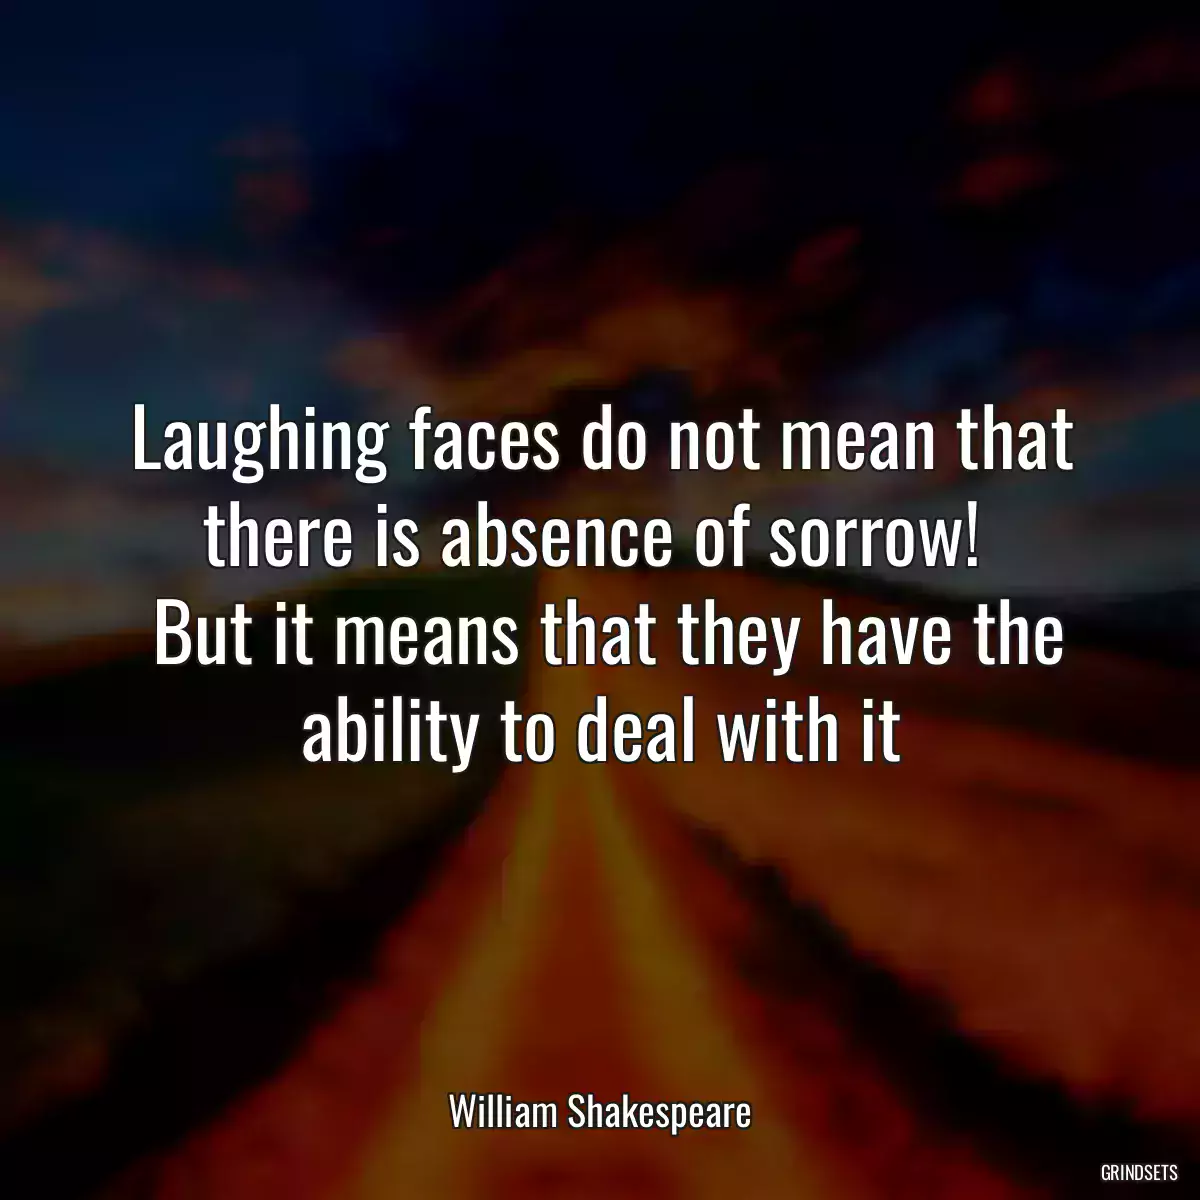 Laughing faces do not mean that there is absence of sorrow! 
 But it means that they have the ability to deal with it